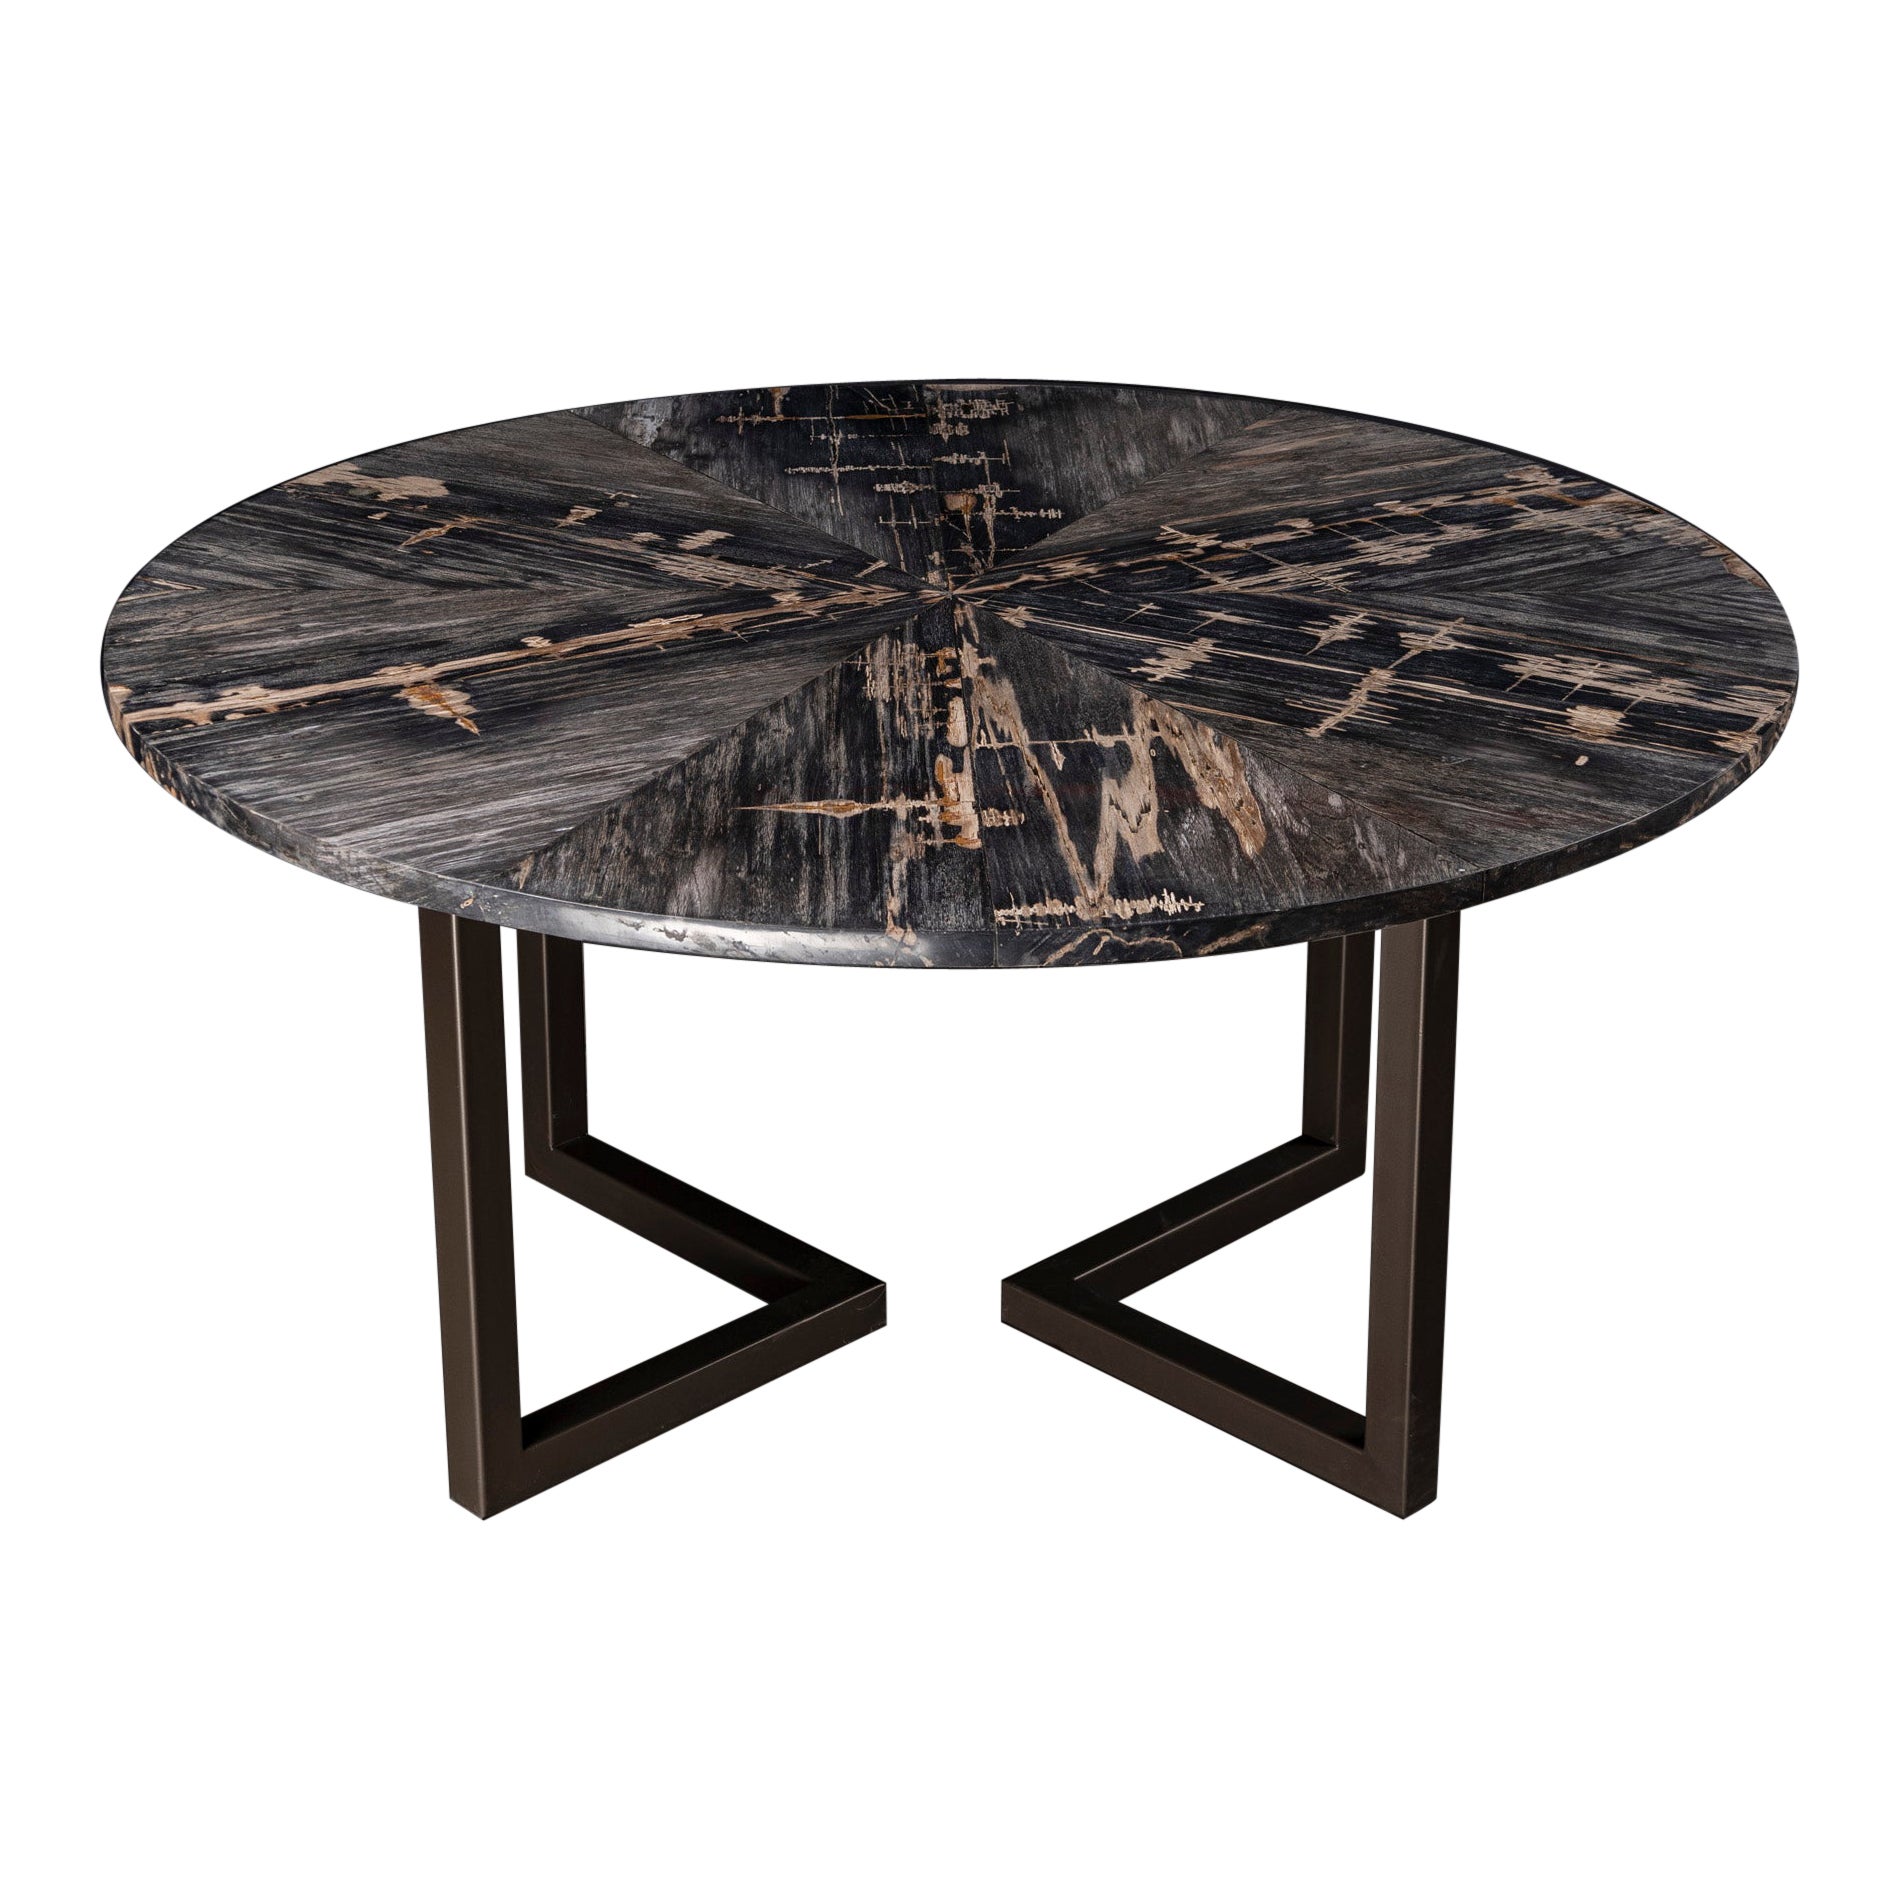 60" Round Petrified Wood Dinning Table with Metal Base For Sale